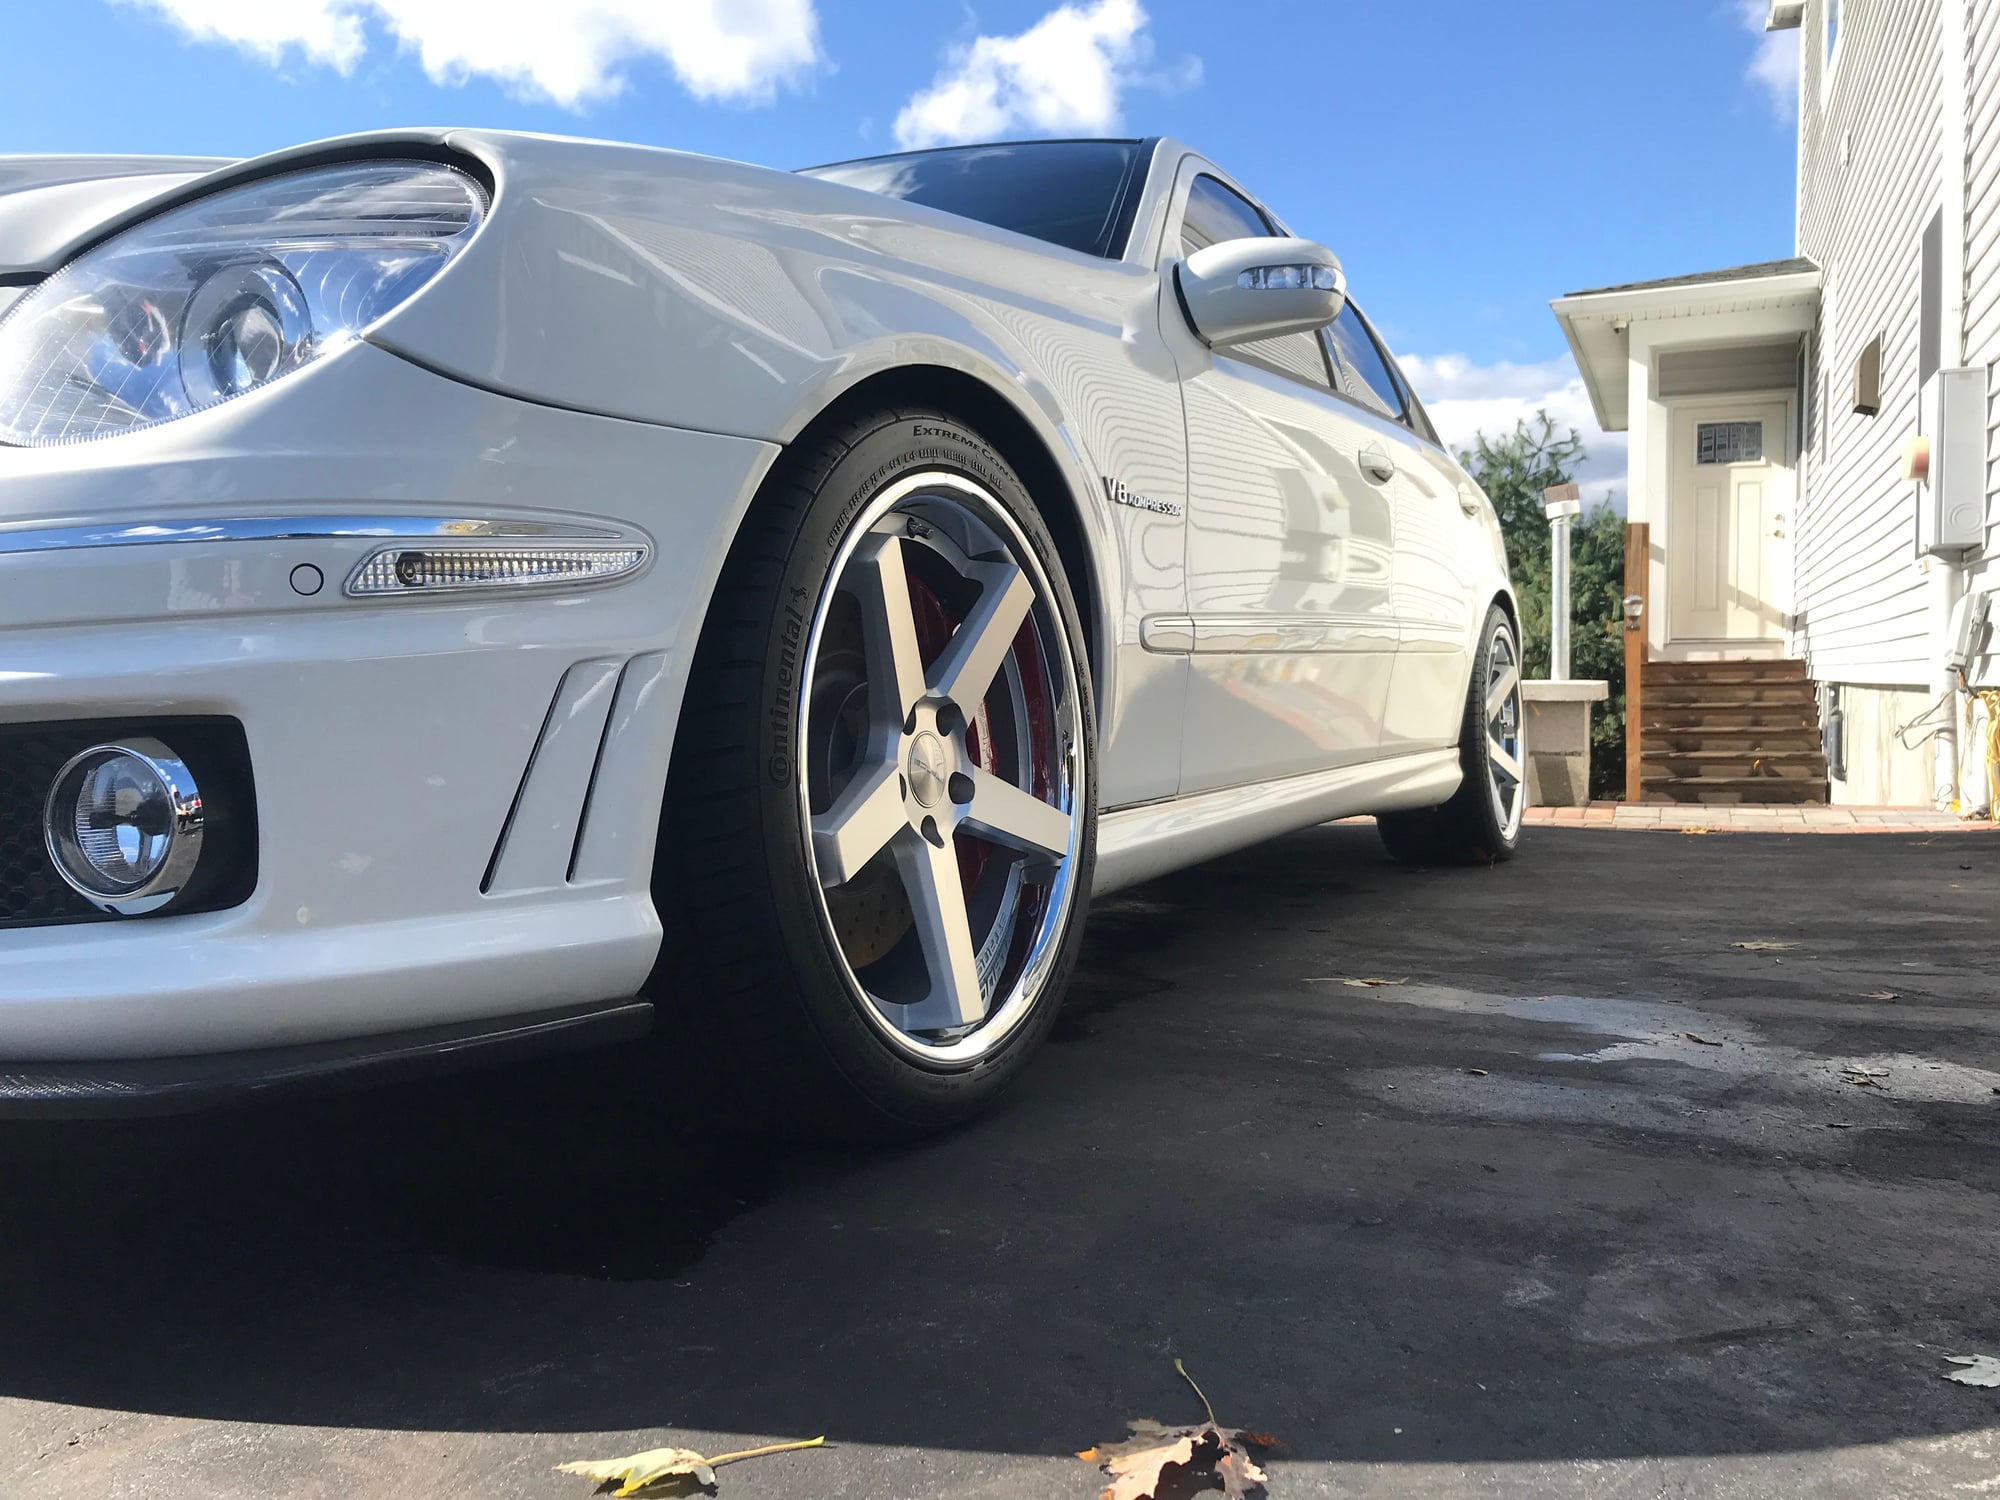 Wheels and Tires/Axles - 19s STANCE SC5 W/ CONTI DSW - Used - 2003 to 2006 Mercedes-Benz E55 AMG - New Haven, CT 06513, United States